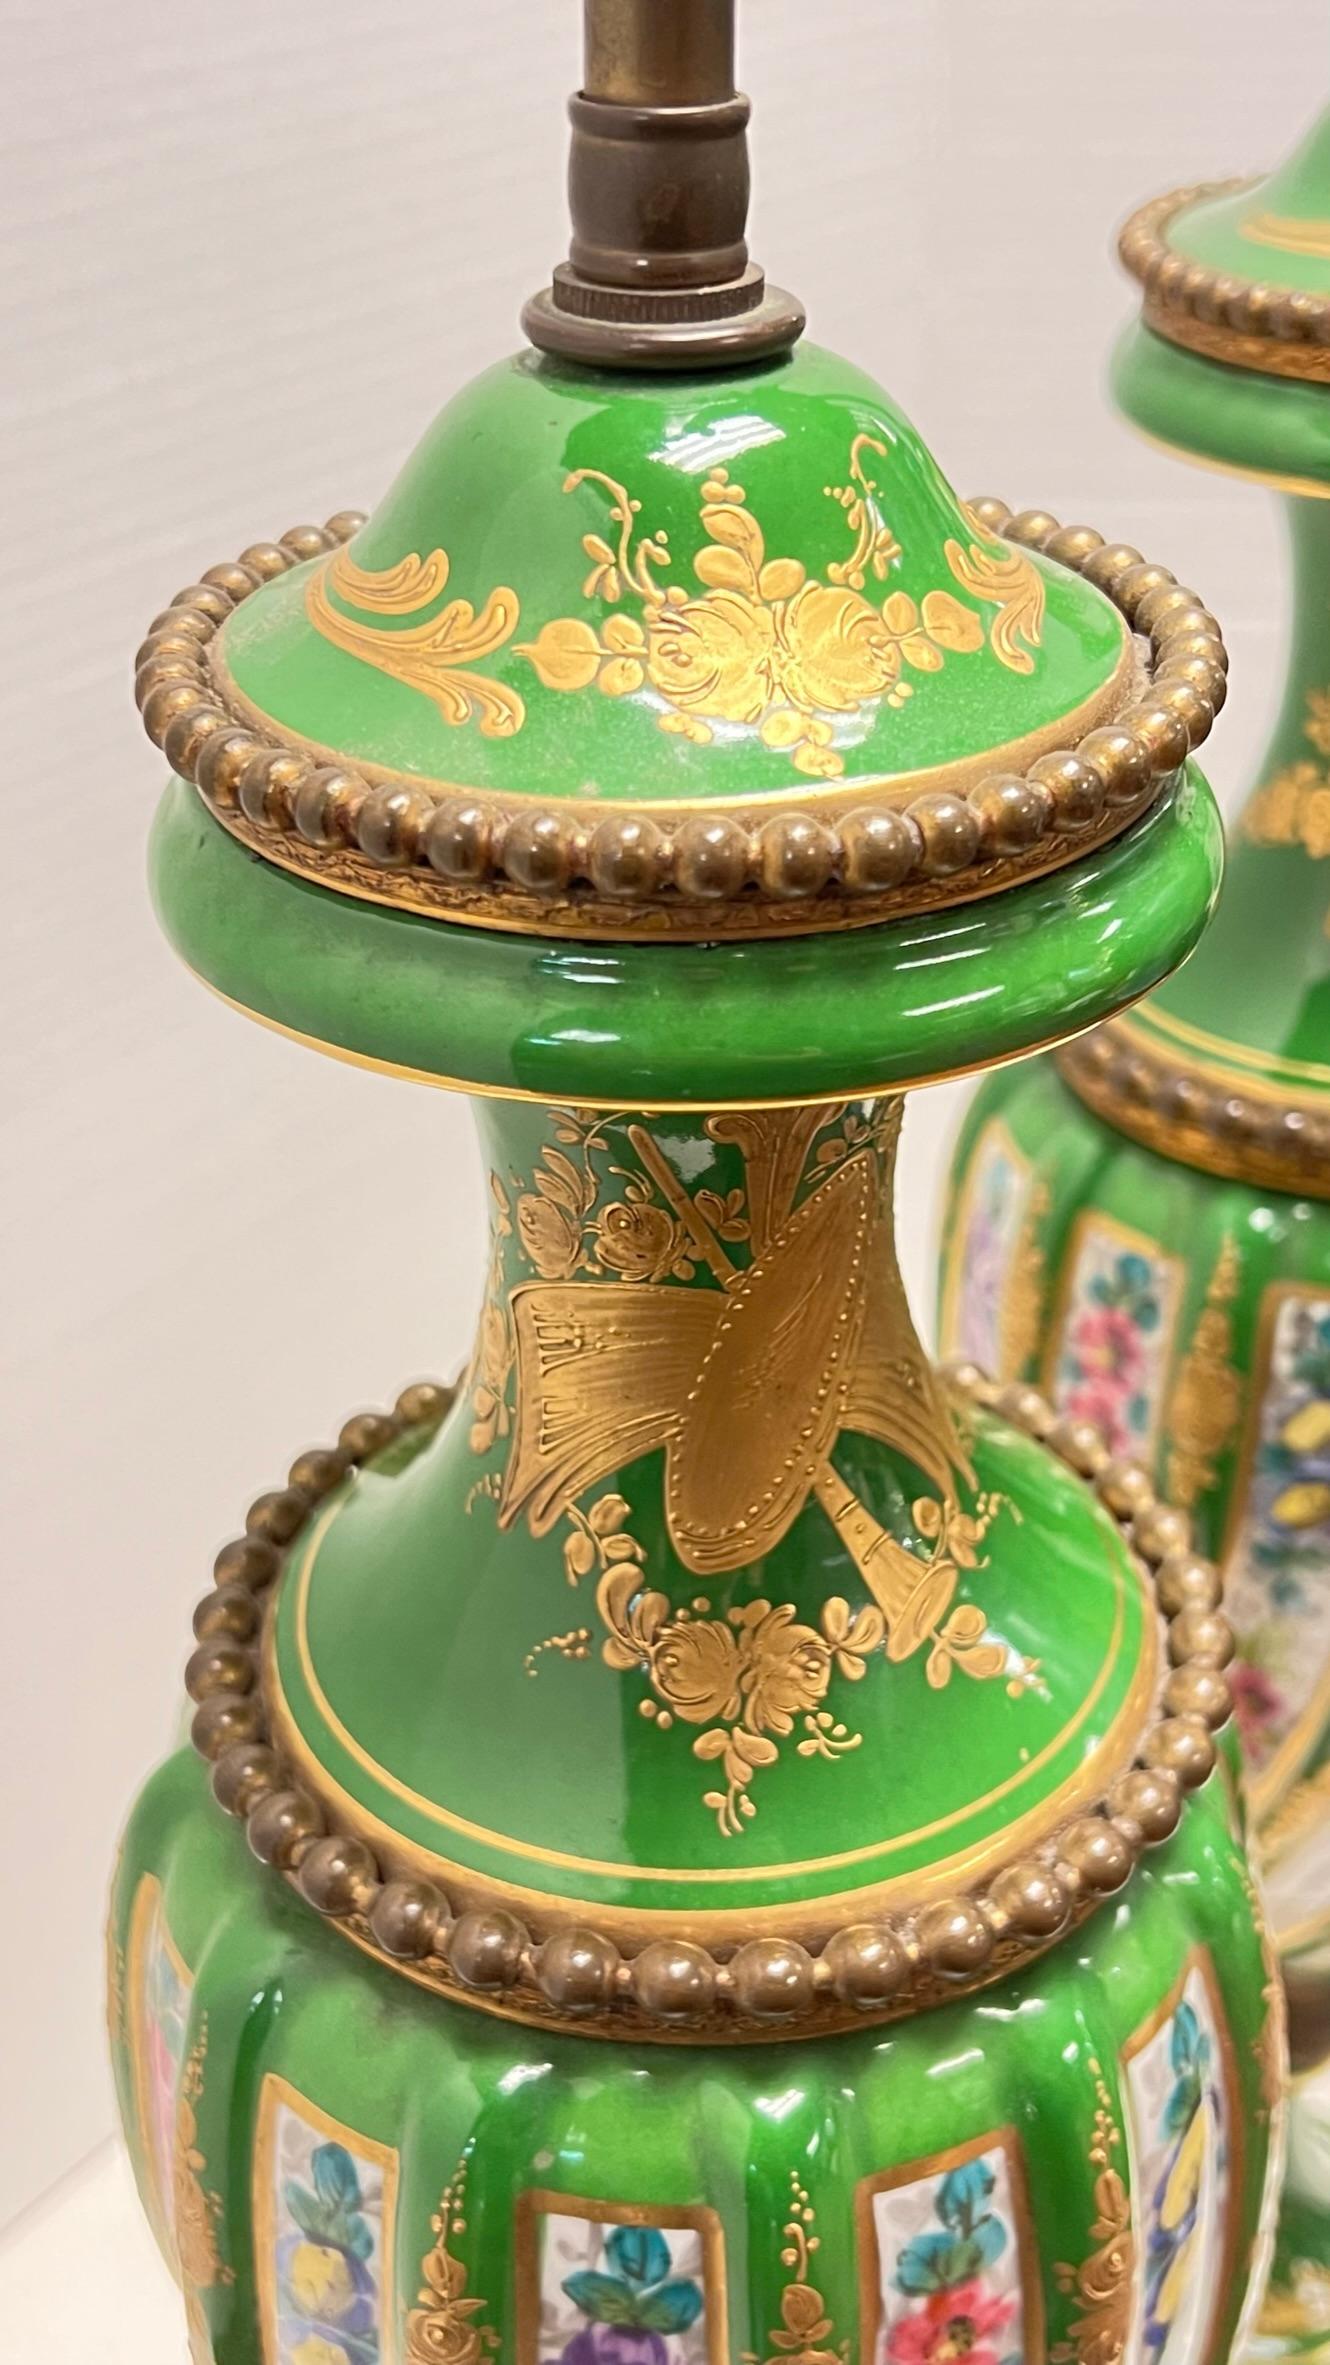 Pair of antique (19th century) French Sevres style porcelain vases with spirling ribbed shape, mounted as table lamps with bronze mounts and fine floral painted designs and gilding on green glazed ground.  In the Louis XVI / Napoleon III period